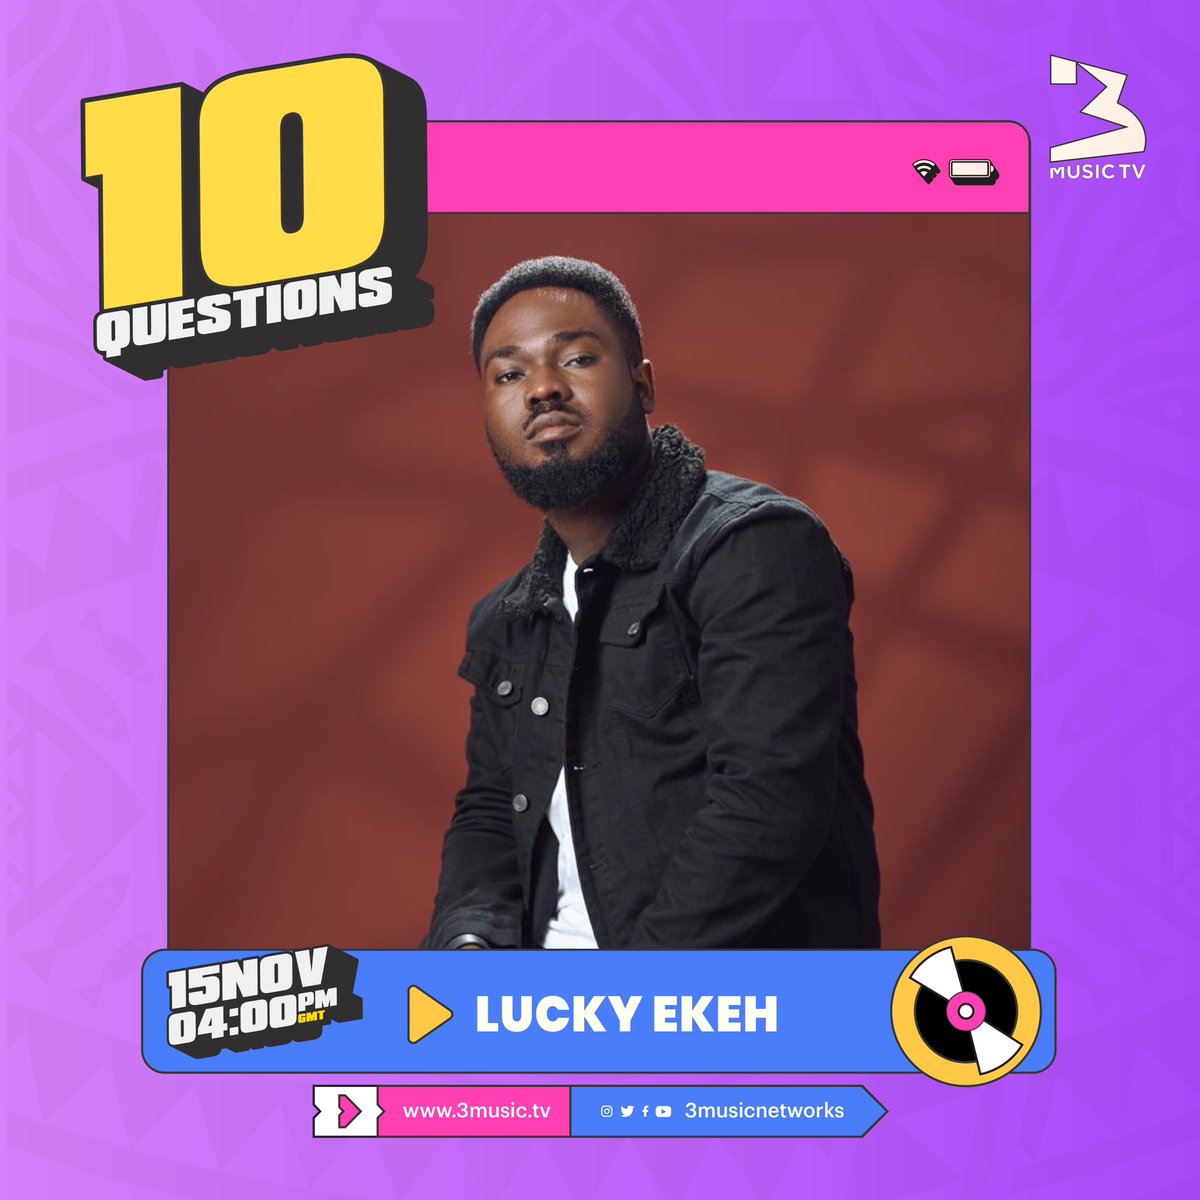 🚨: Ladies and gentlemen,  we have @iamLuckyEkeh on #10Questions this week. 

Make sure you're tuned in to #3MusicTV at 4:00pm sharp.